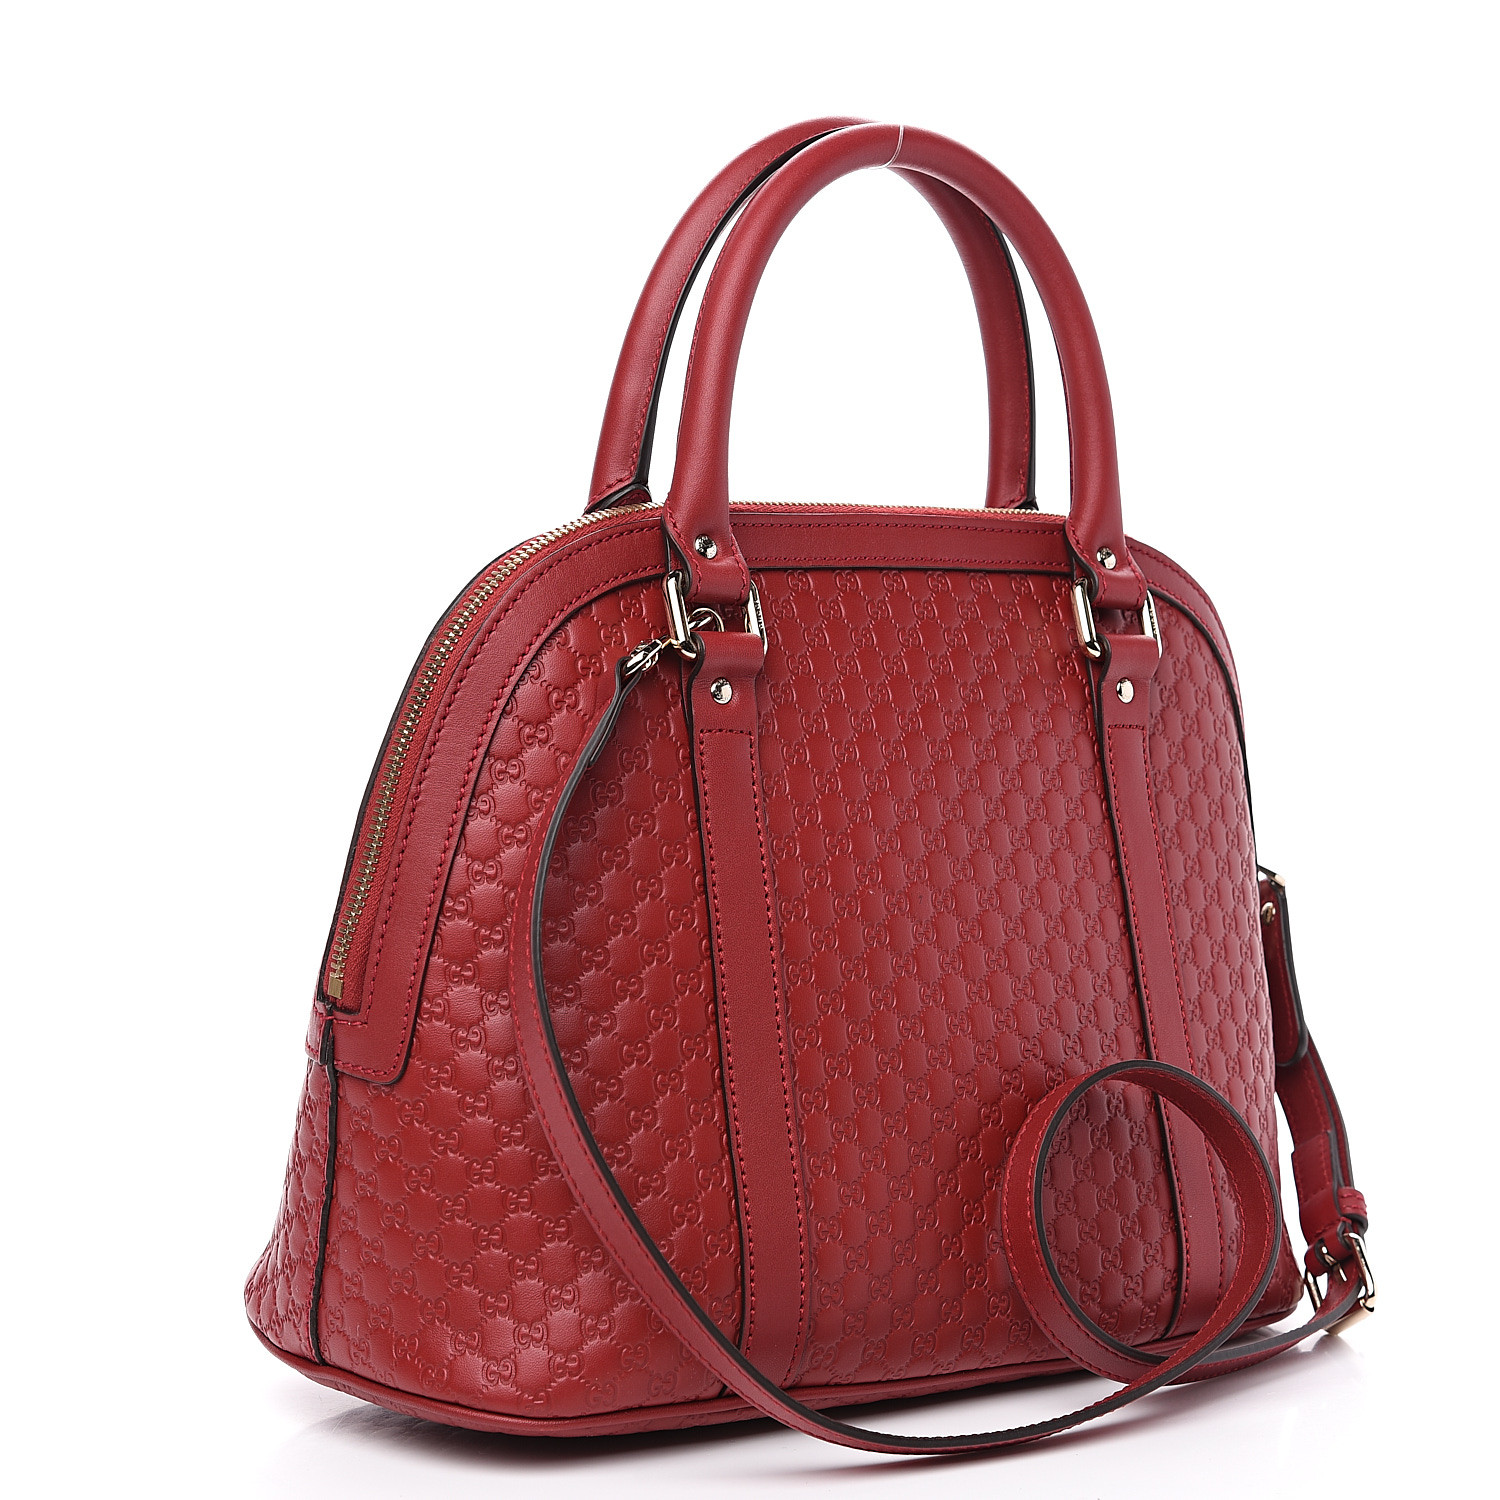 Gucci Red Microguccissima Leather Handbag | Literacy Ontario Central South